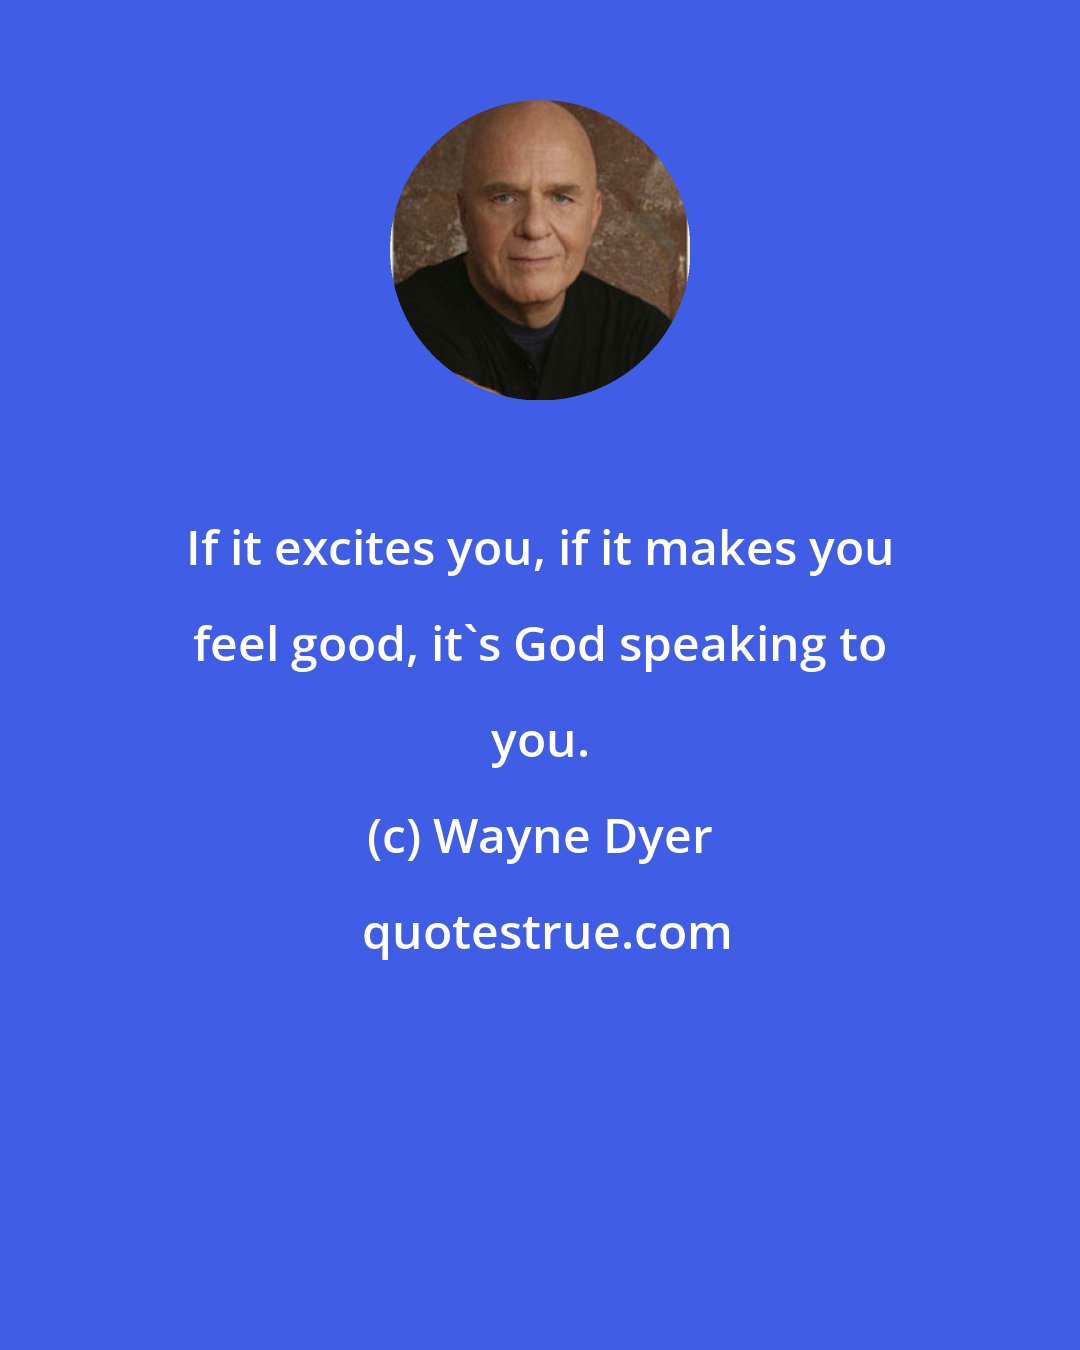 Wayne Dyer: If it excites you, if it makes you feel good, it's God speaking to you.